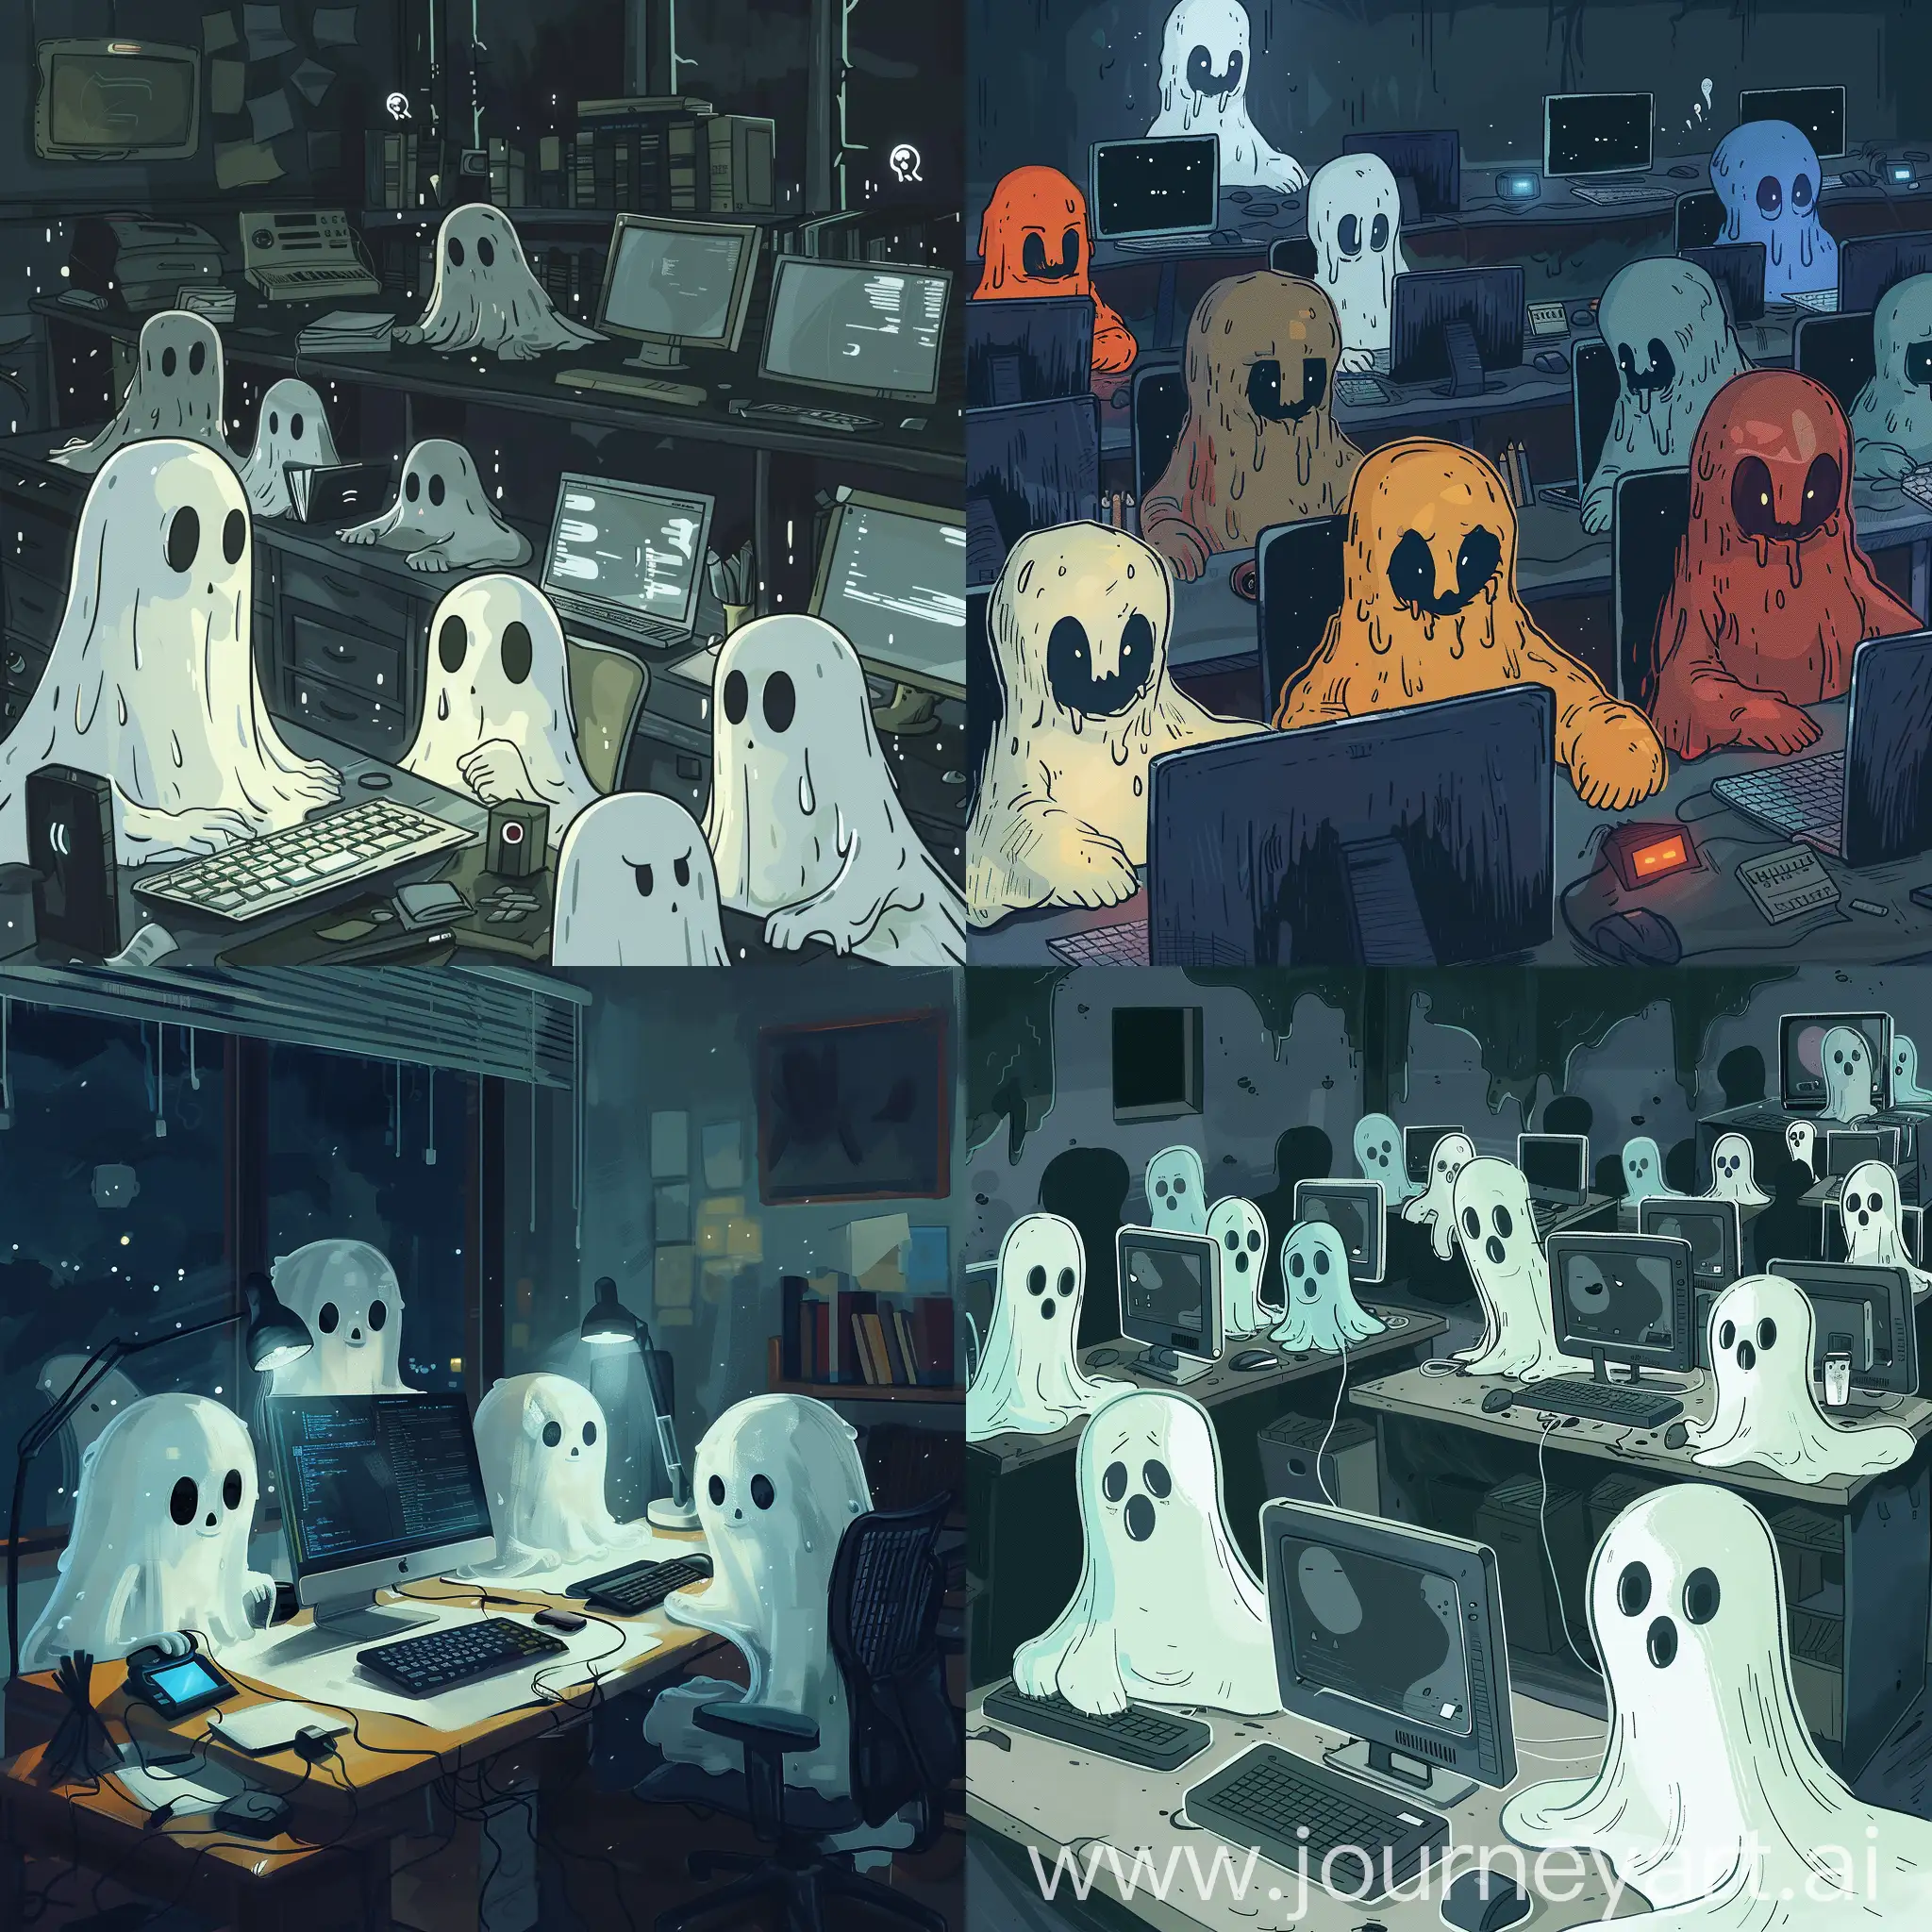 Ghostly-Gathering-Haunted-Workspace-for-Programmers